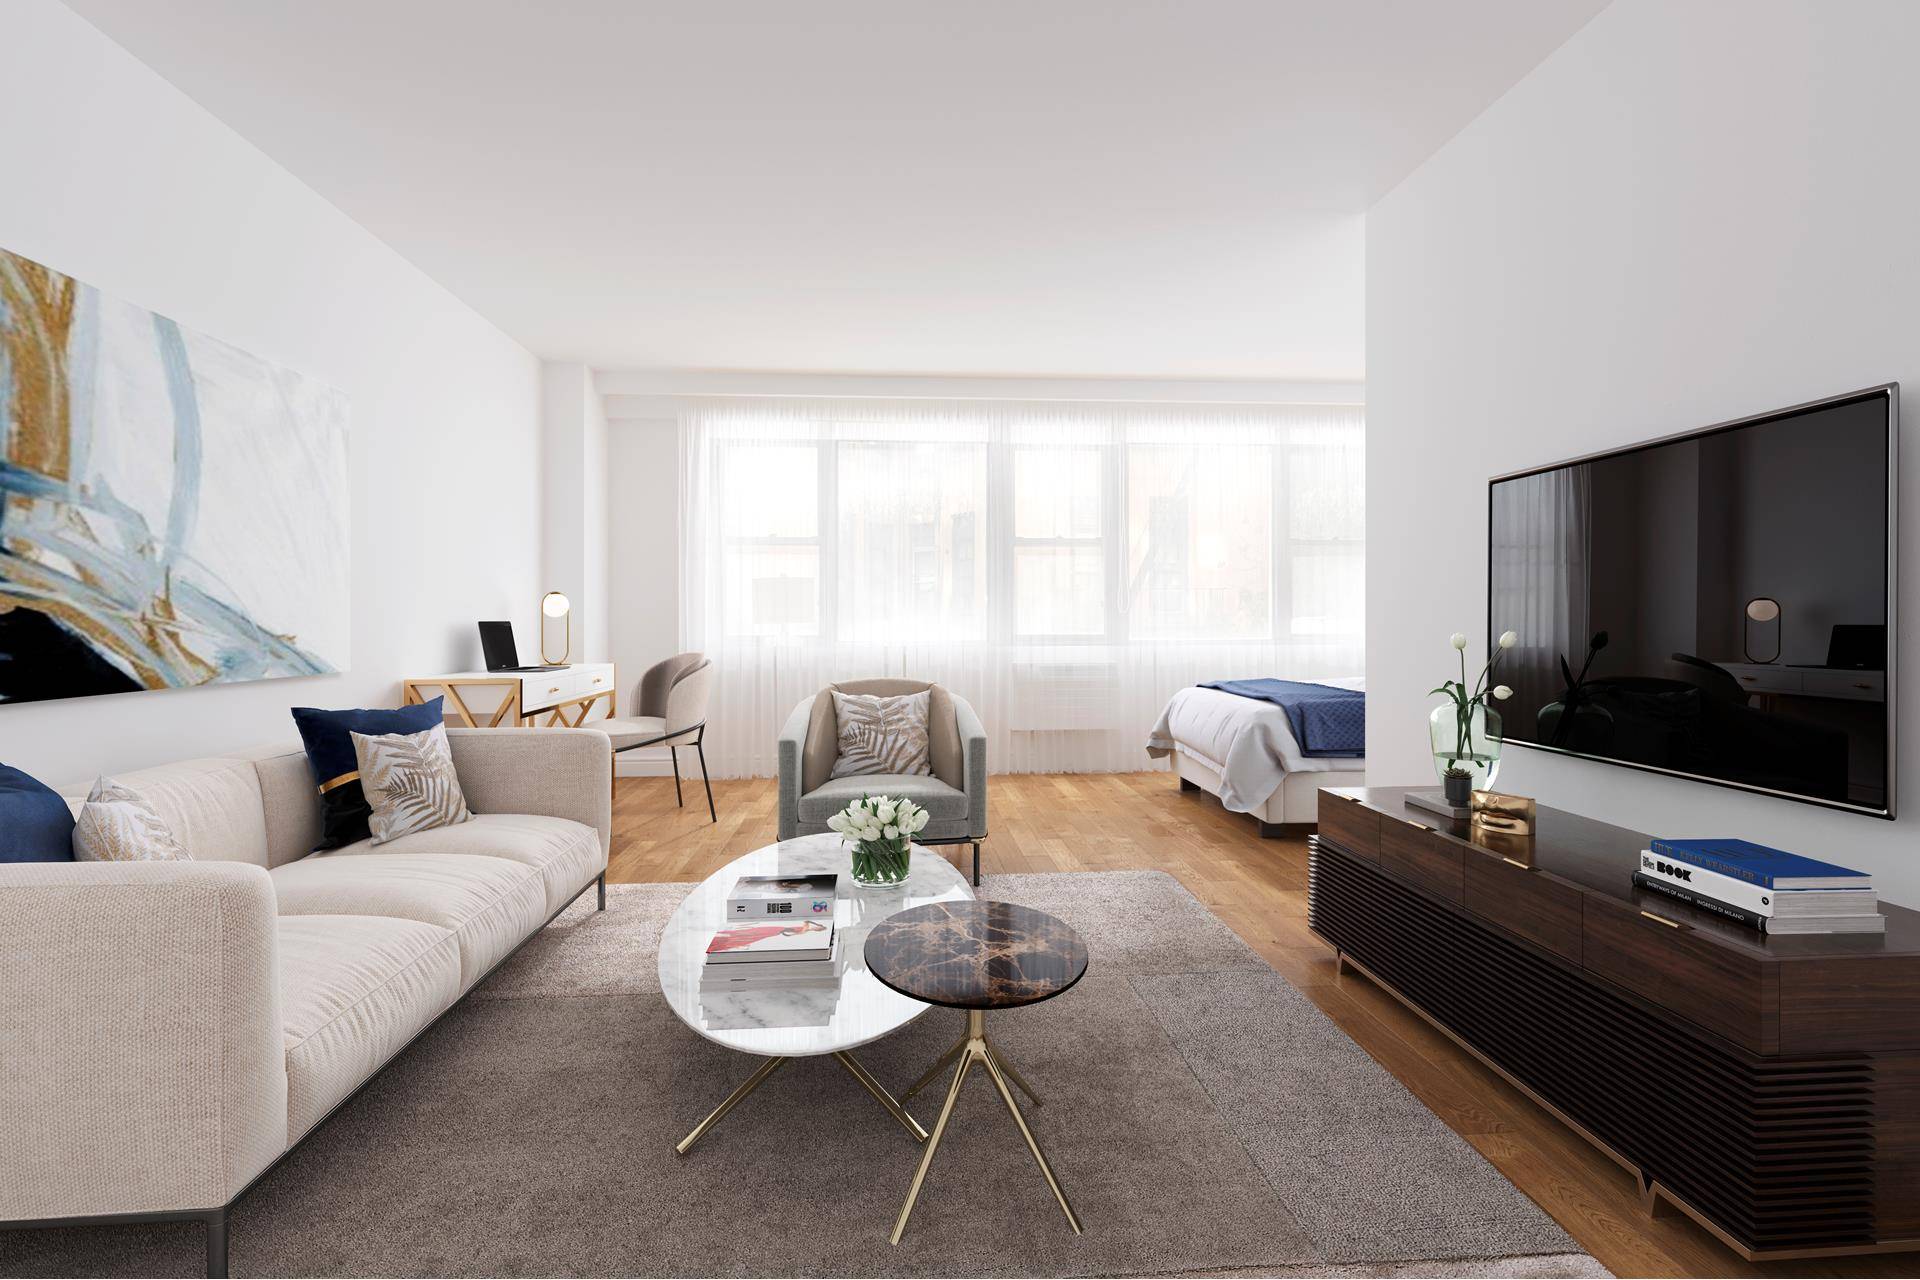 Introducing 230 East 15th Street, 4L this spacious alcove studio is a true home that provides a comfortable, efficient layout with great natural light from large, wall to wall windows.